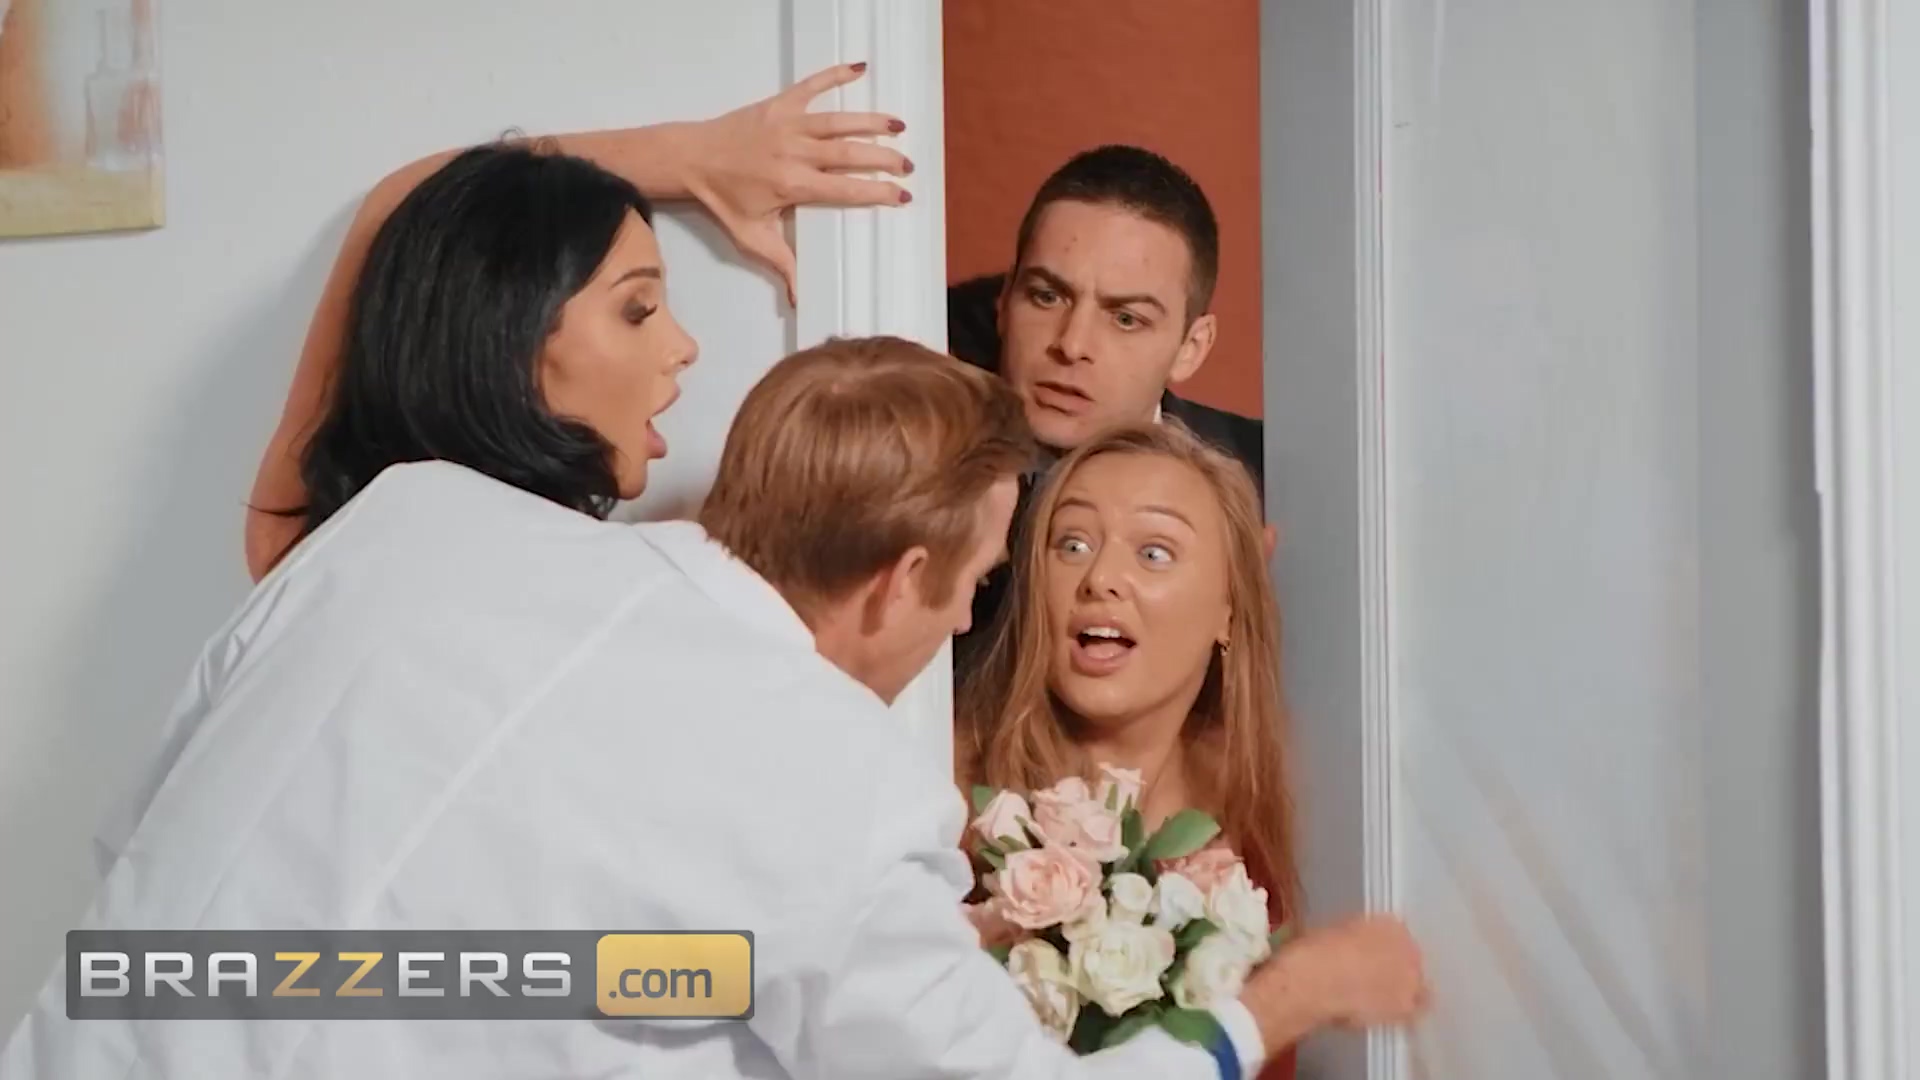 Busty bride cheating on groom with doctor before wedding! photo